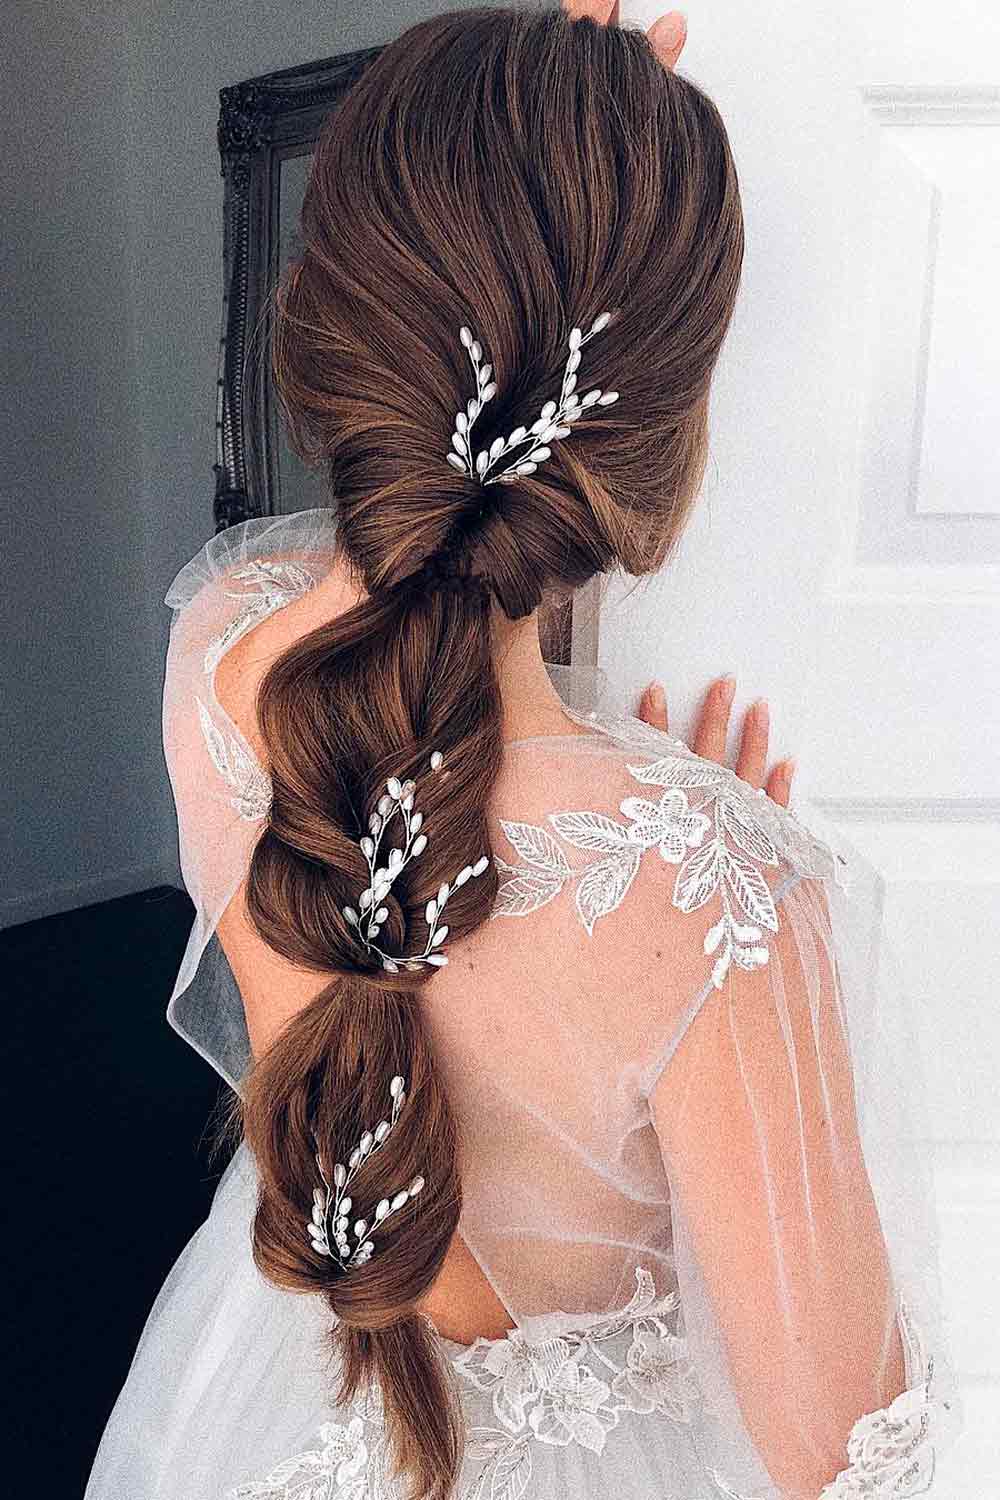 Romantic Bubble Hair With Flowers